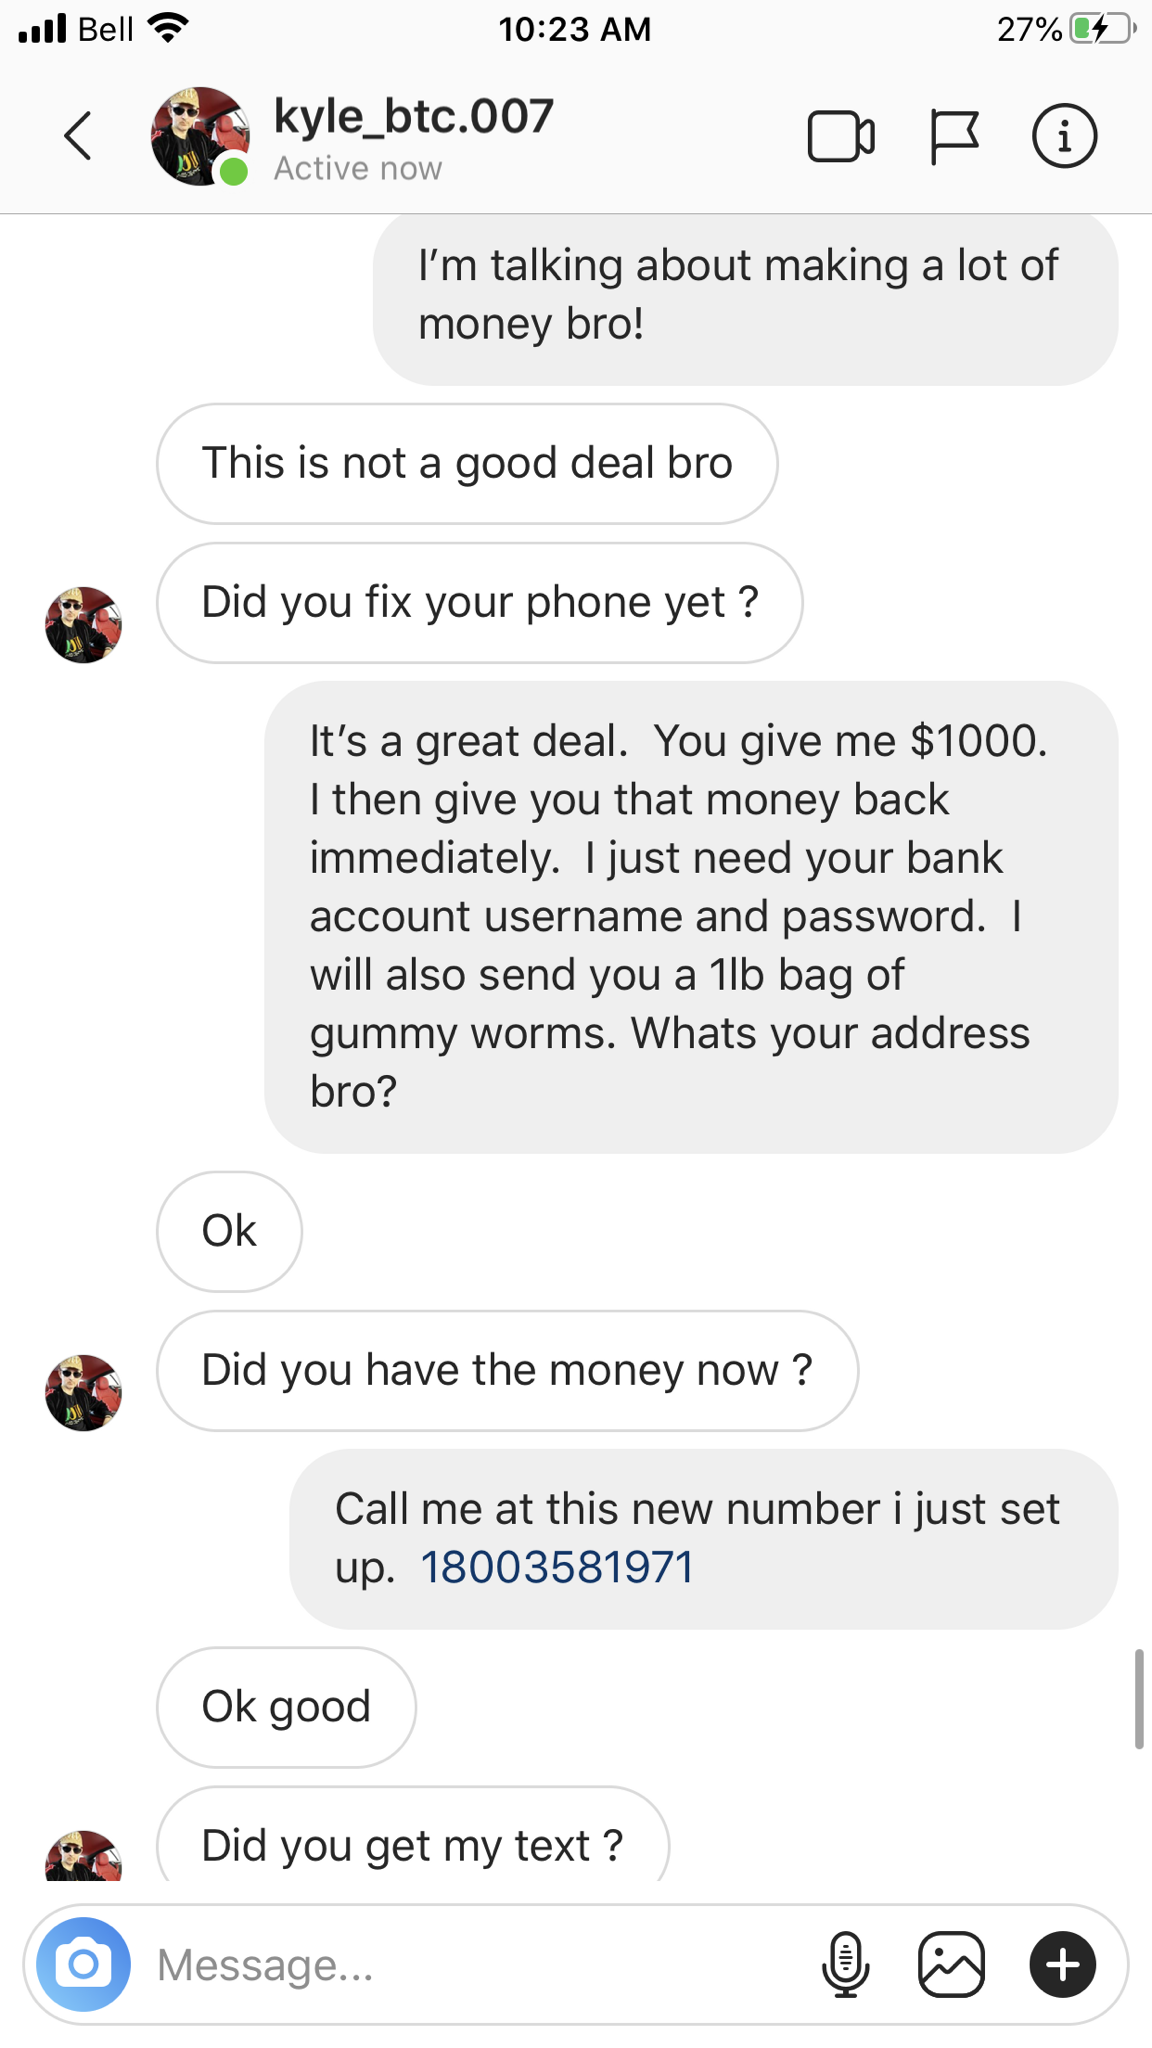 screenshot - il Bell 27% 1023 Am kyle_btc.007 Active now I'm talking about making a lot of money bro! This is not a good deal bro Did you fix your phone yet? It's a great deal. You give me $1000. I then give you that money back immediately. I just need yo